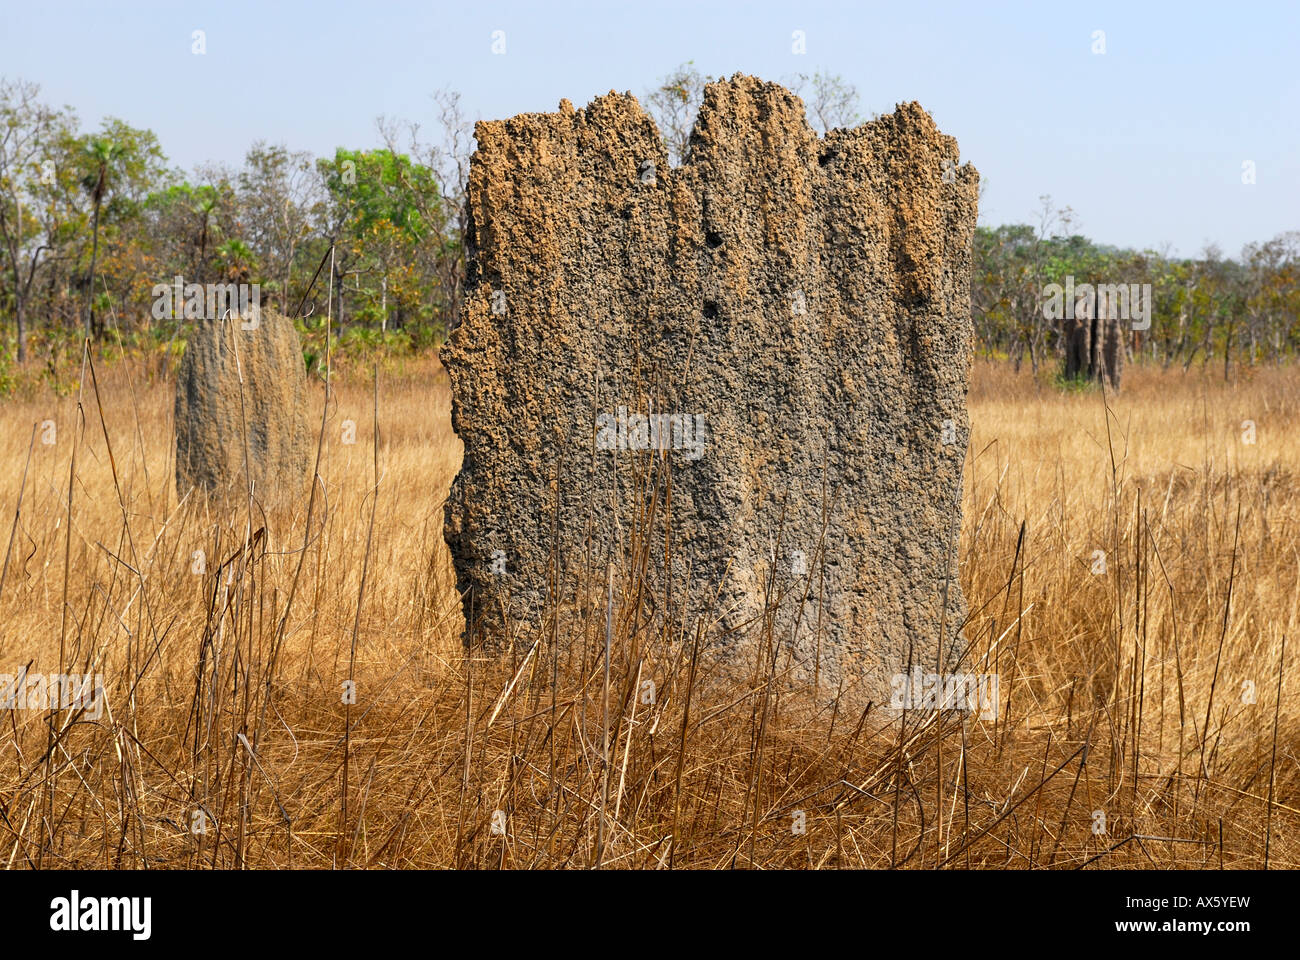 Magnetic Termite Mounds built by Compass Termites (Amitermes meridionalis), Litchfield National Park, Northern Territory, Austr Stock Photo